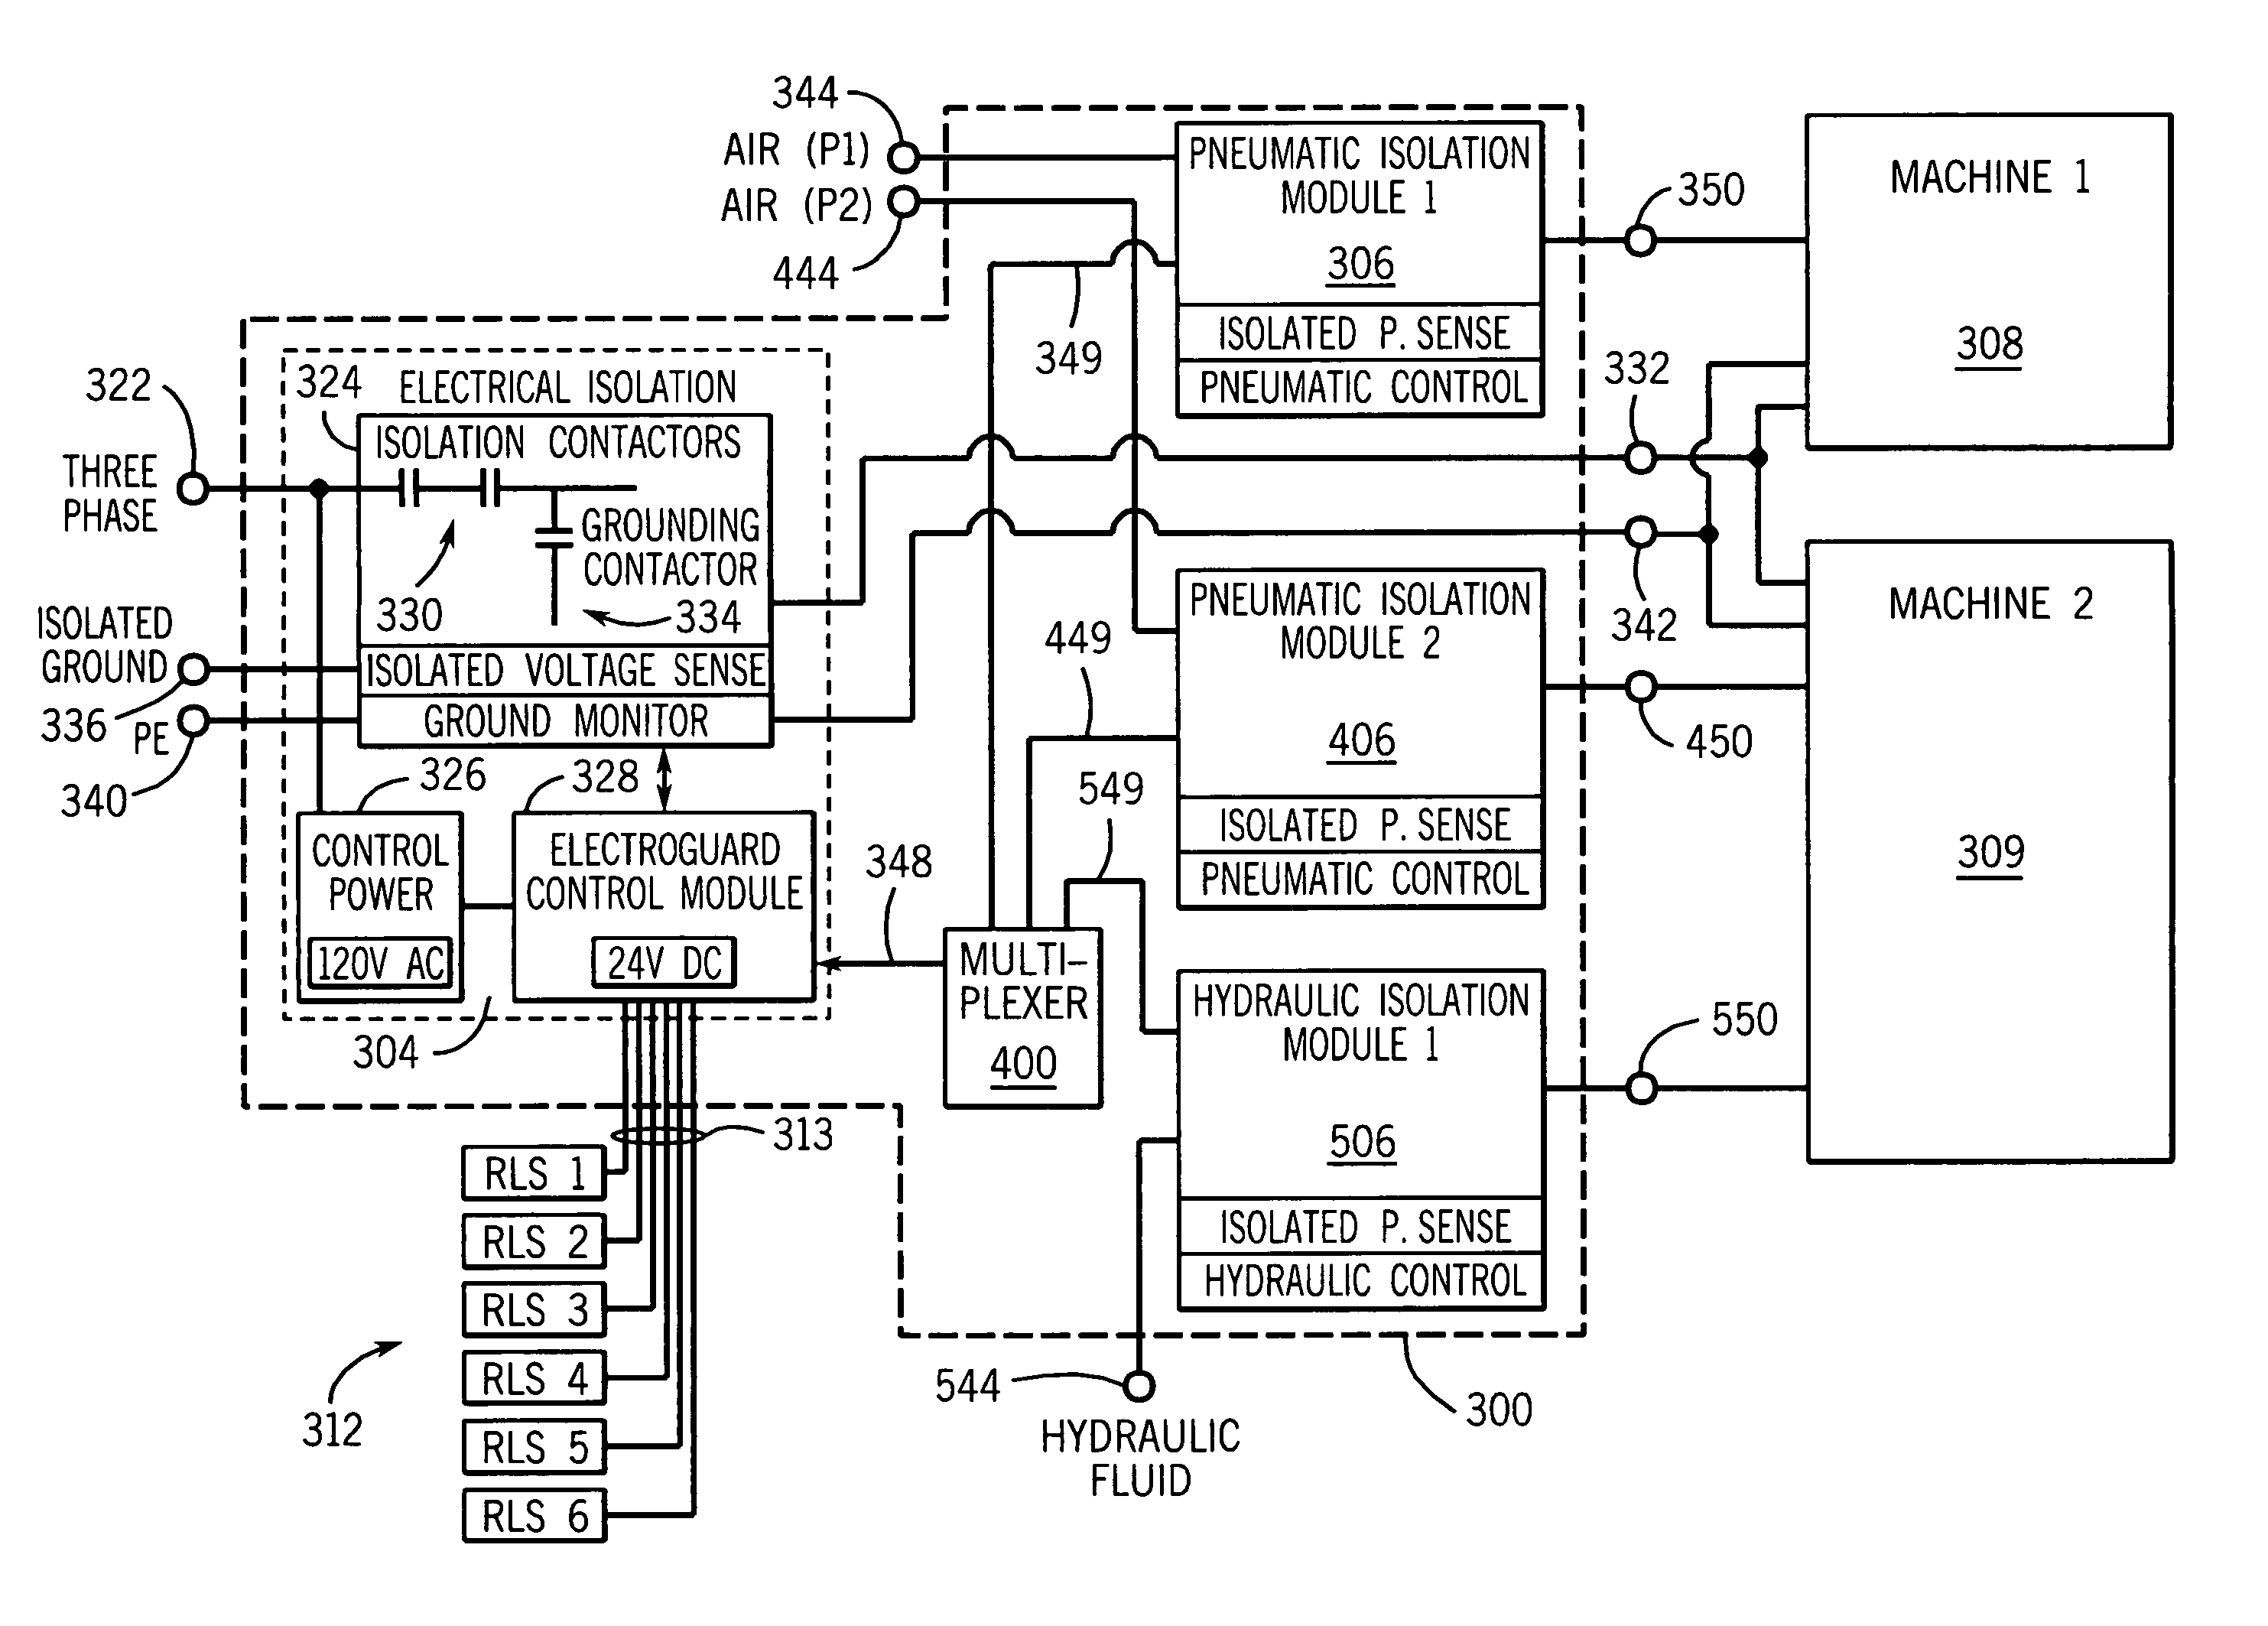 Combination control system with intermediate module